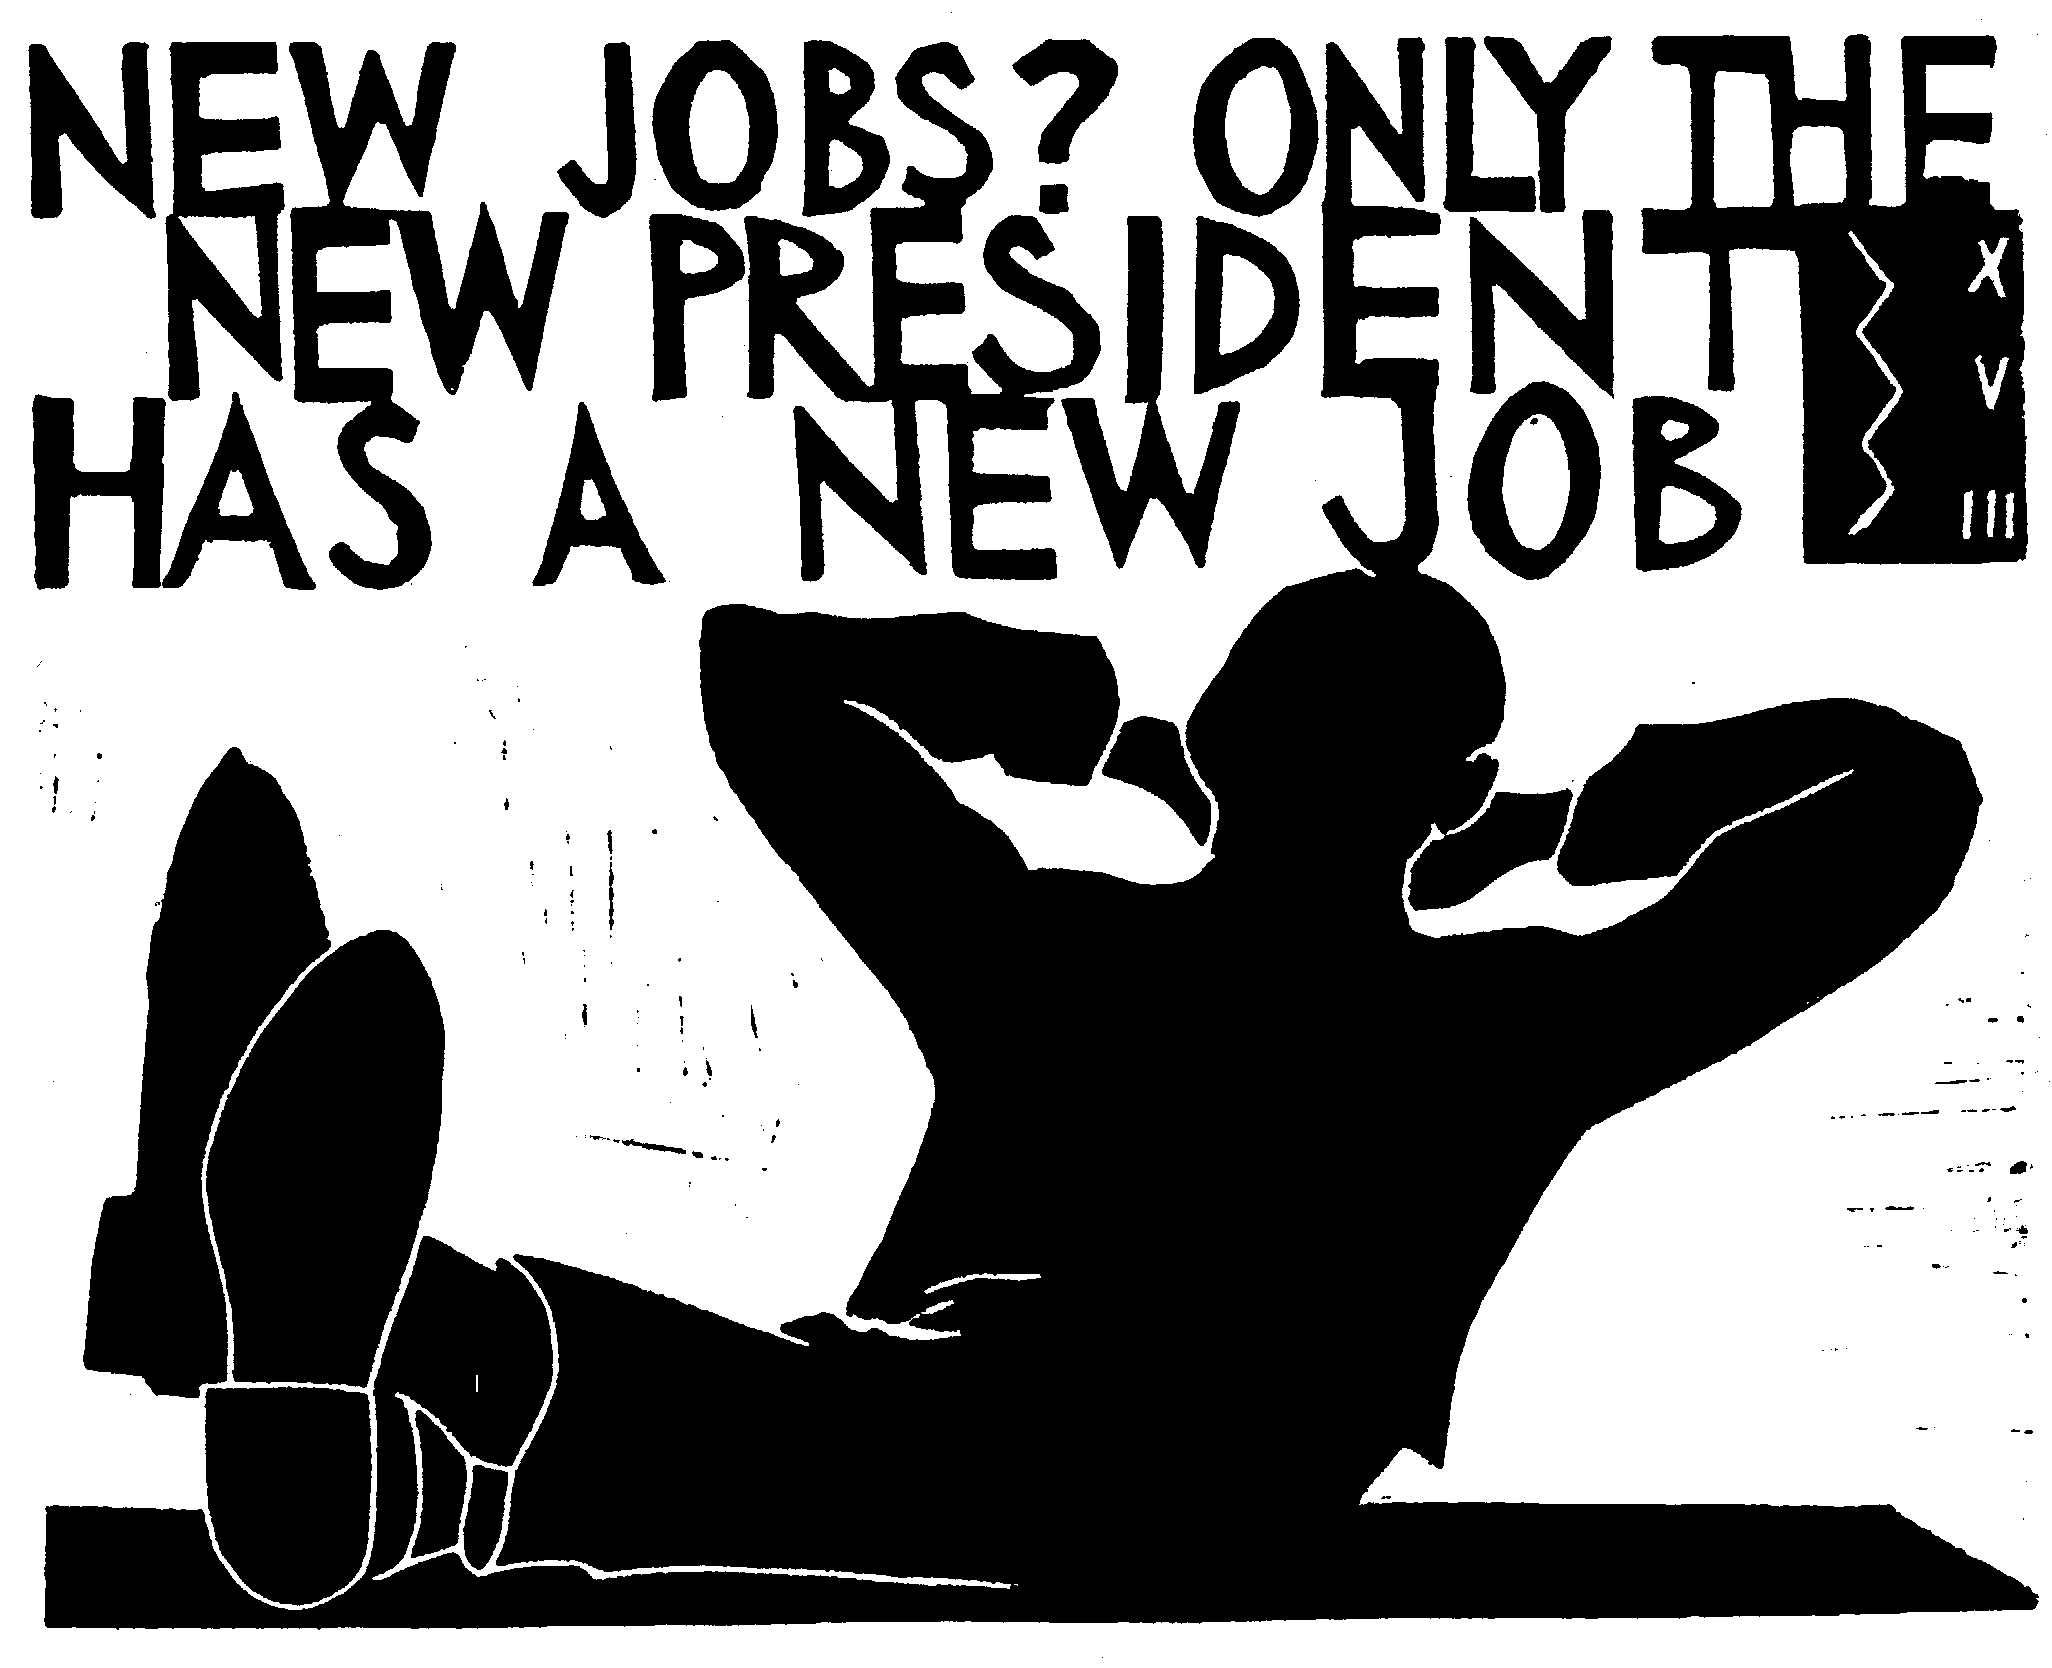 Only the new President has a new job